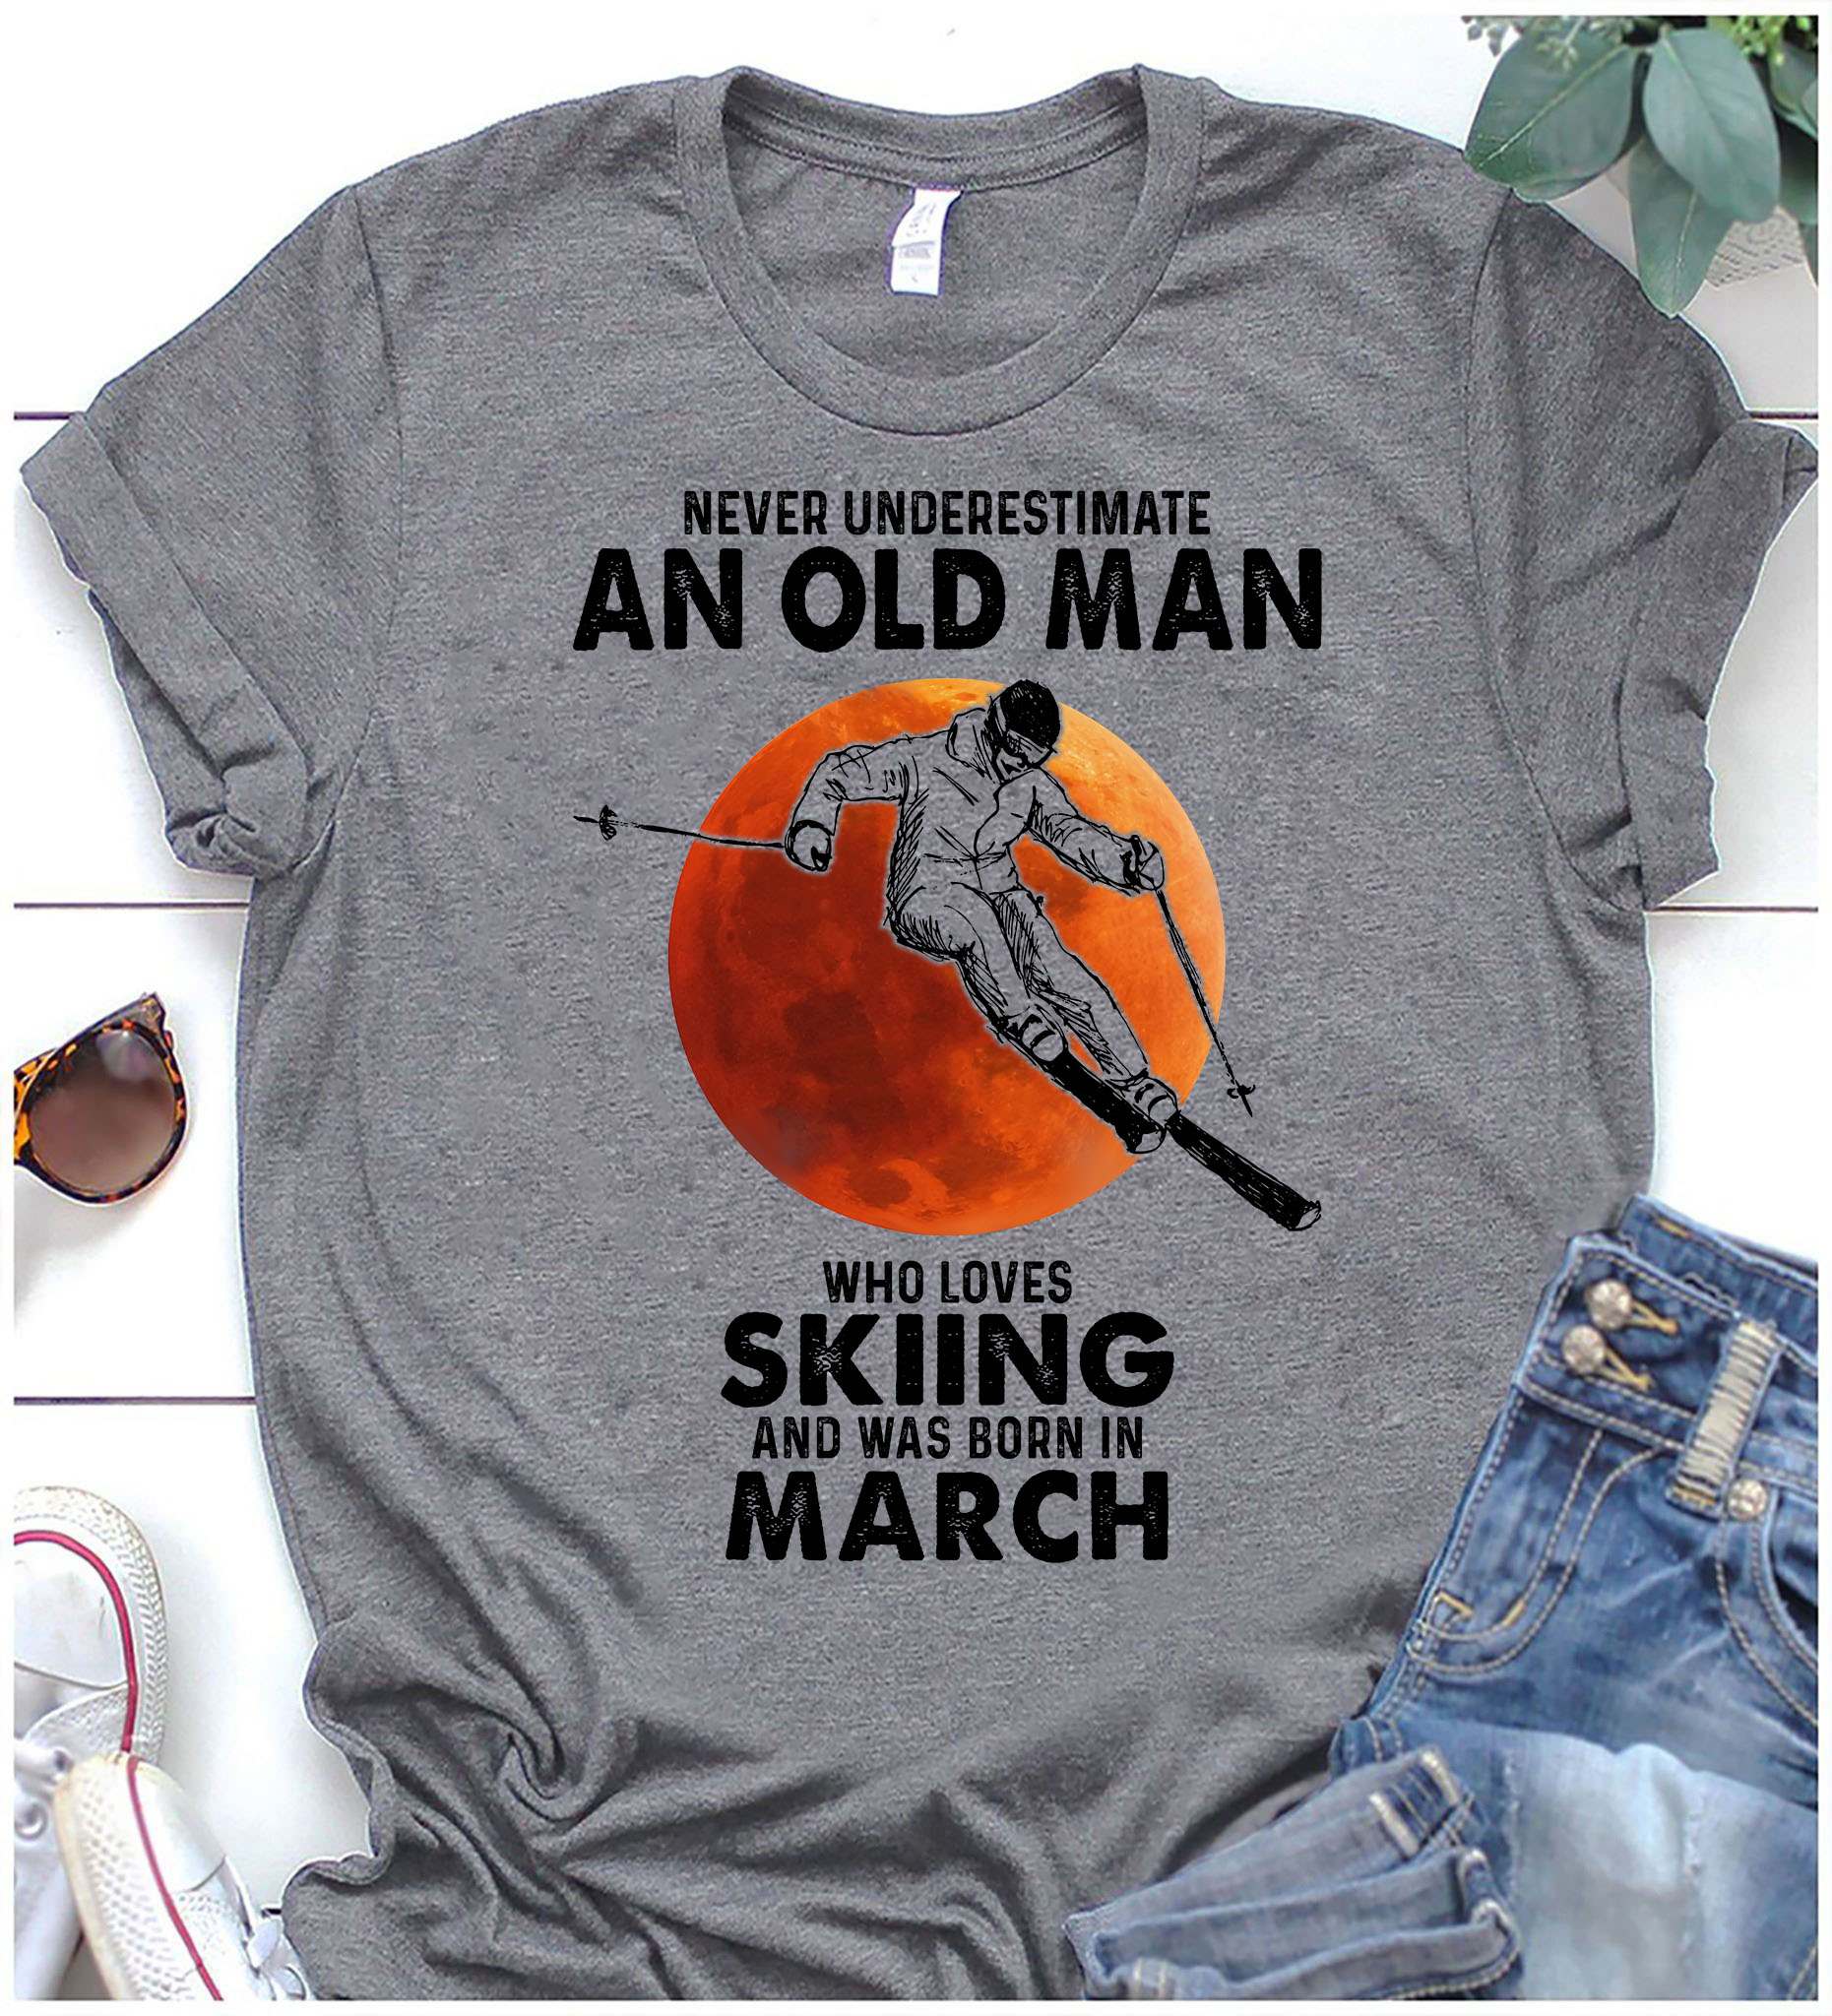 Man Skiing, March Birthday Man - Never underestimate an old man who loves skiing and was born in march